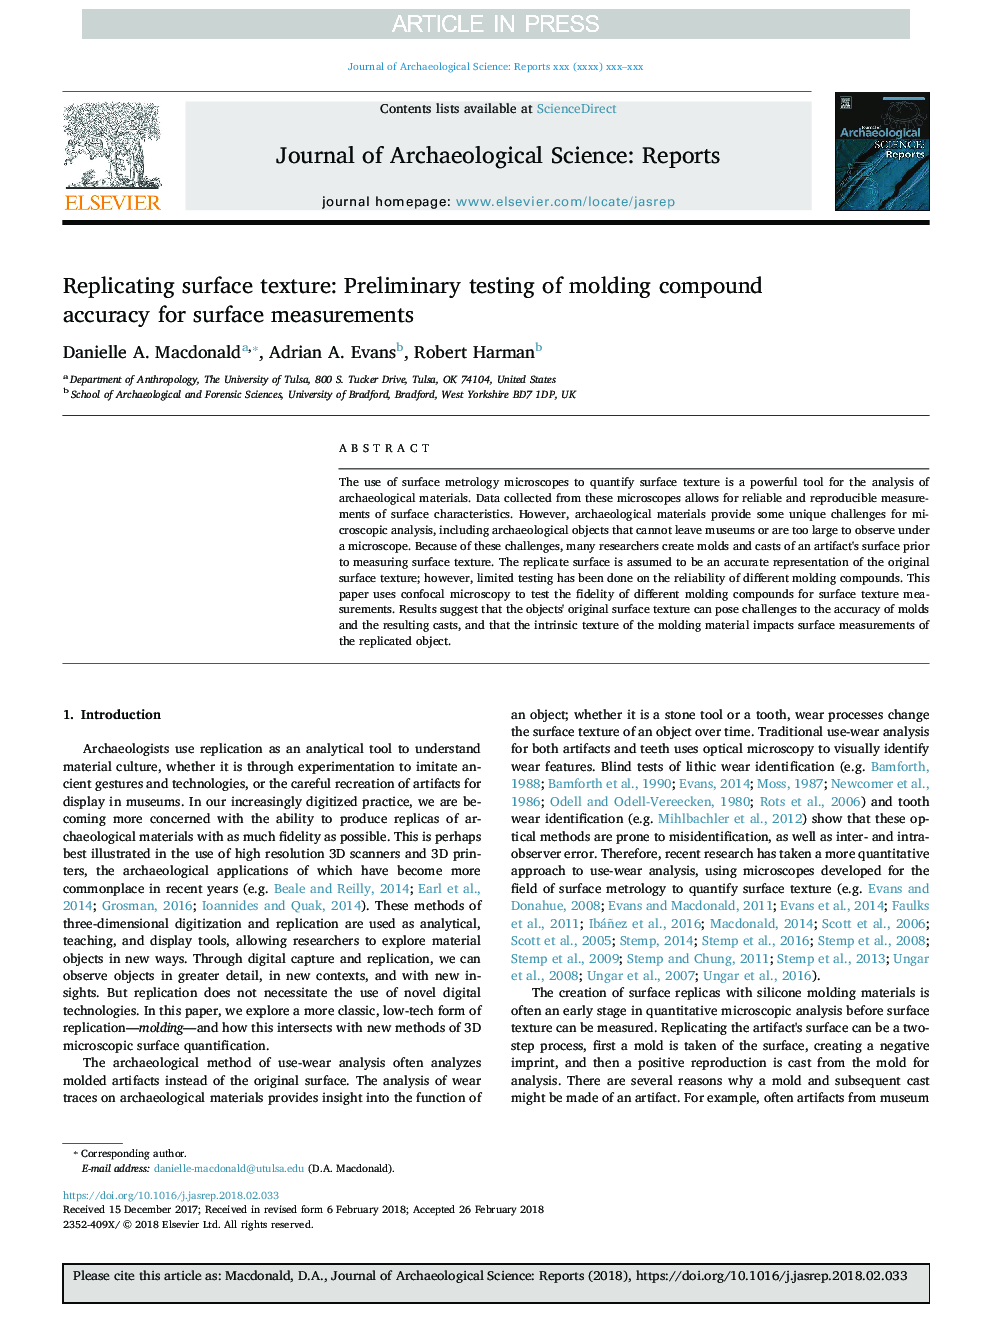 Replicating surface texture: Preliminary testing of molding compound accuracy for surface measurements